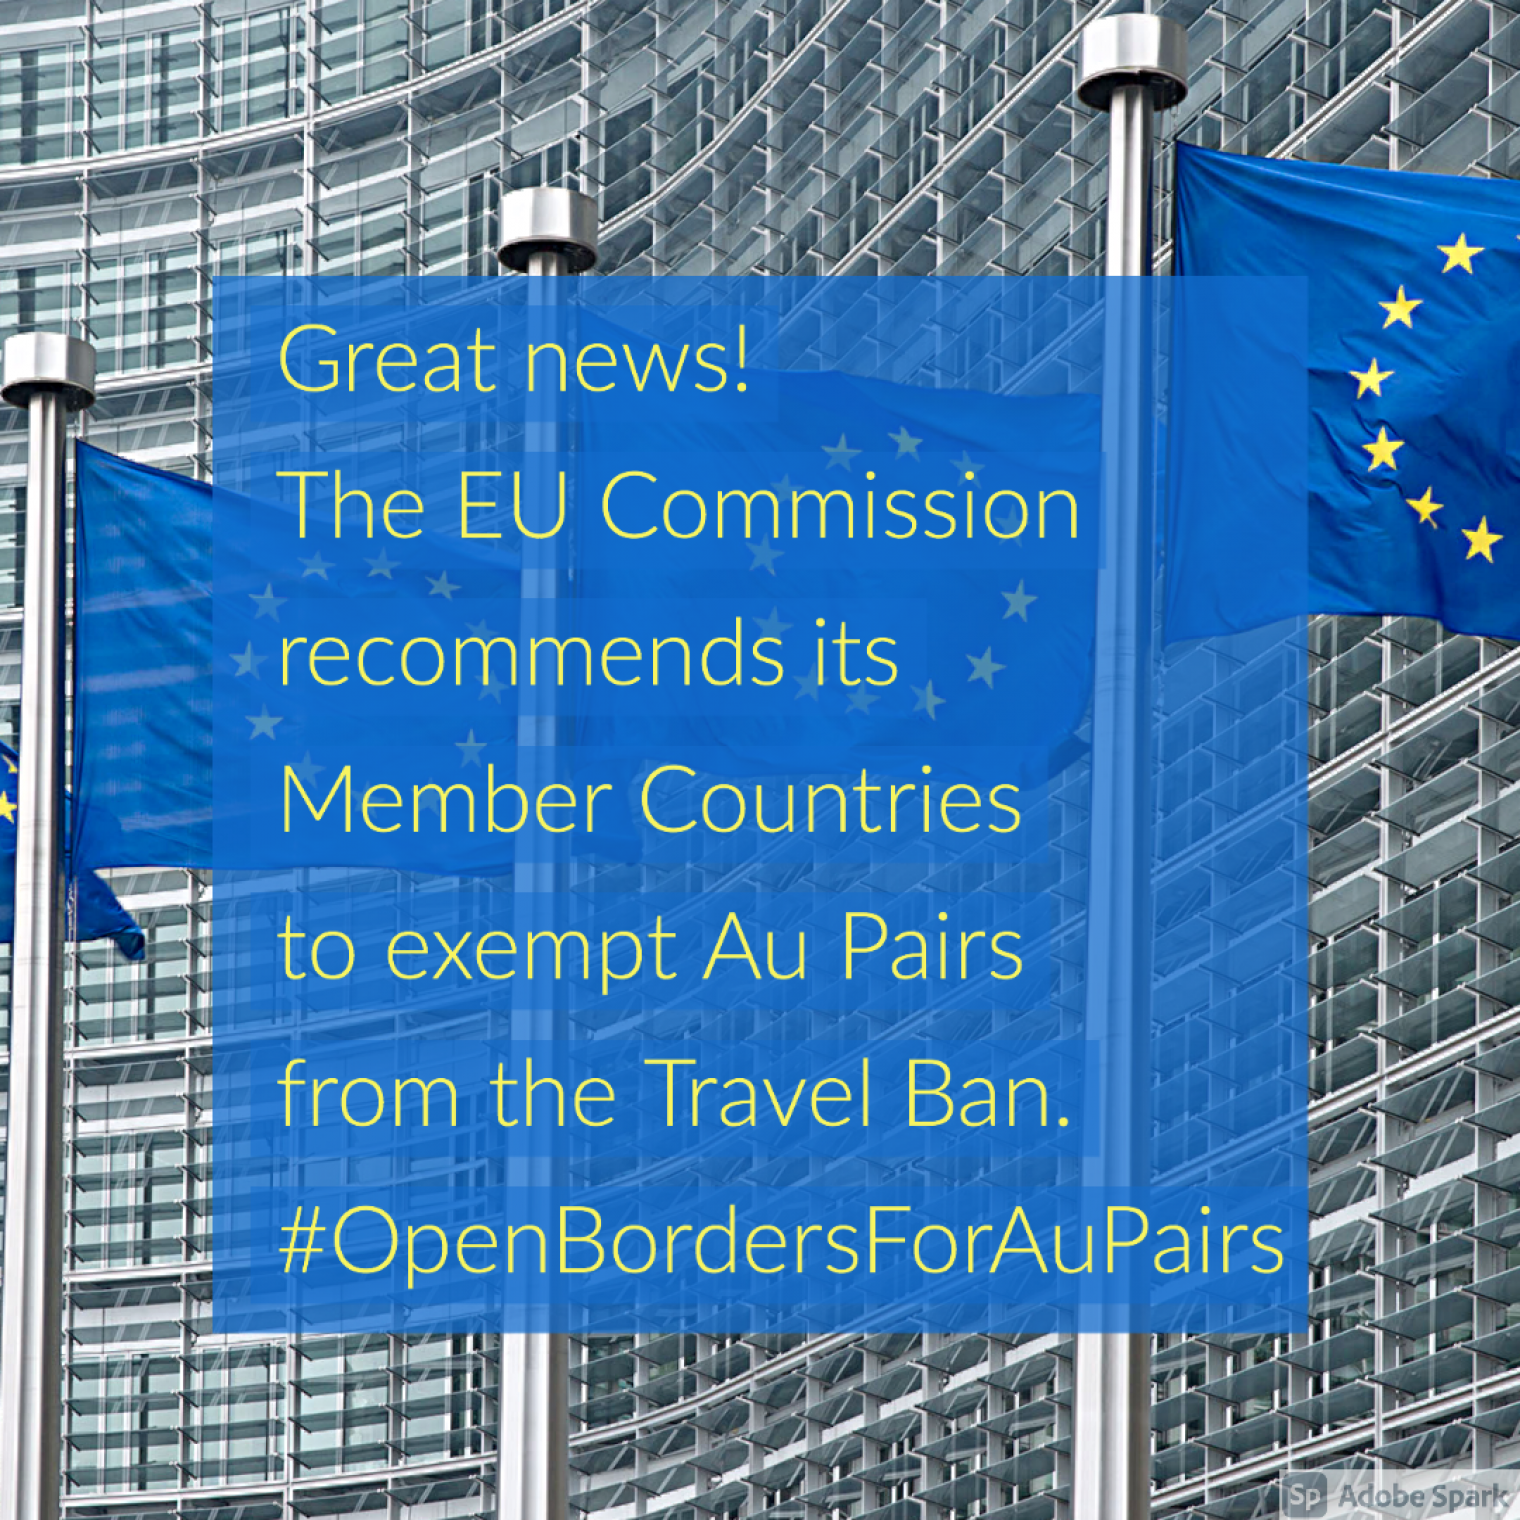 EU Commission exempts Au Pairs from the Covid 19 related Travel Ban to the EU